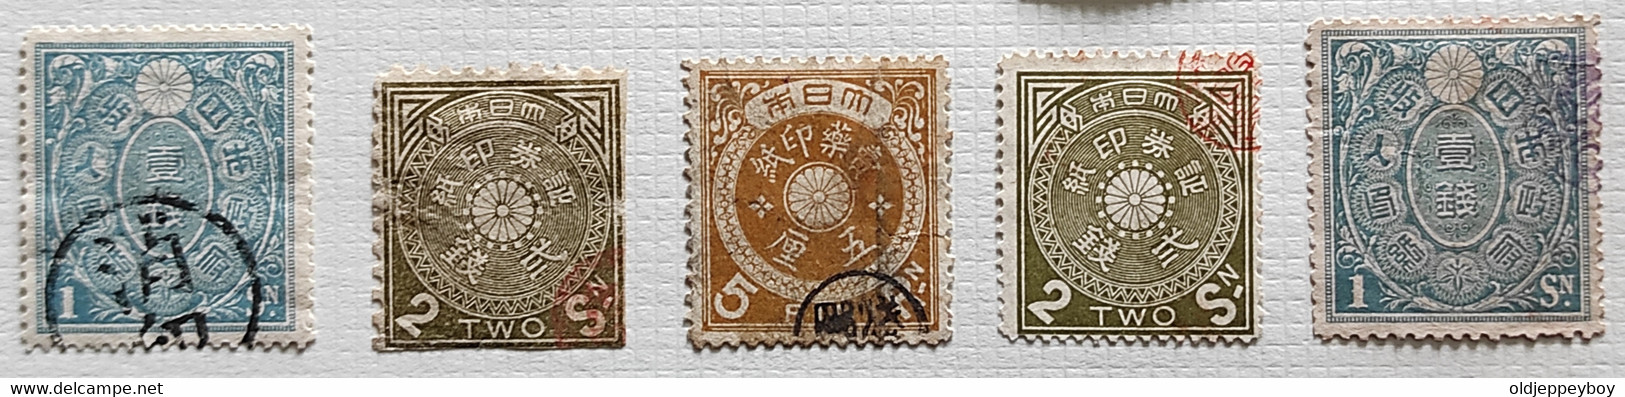 JAPAN  Tax Due Official Revenue 2 X 1Sn, 2 X 2 Sn. And 5 Sn - Used Stamps